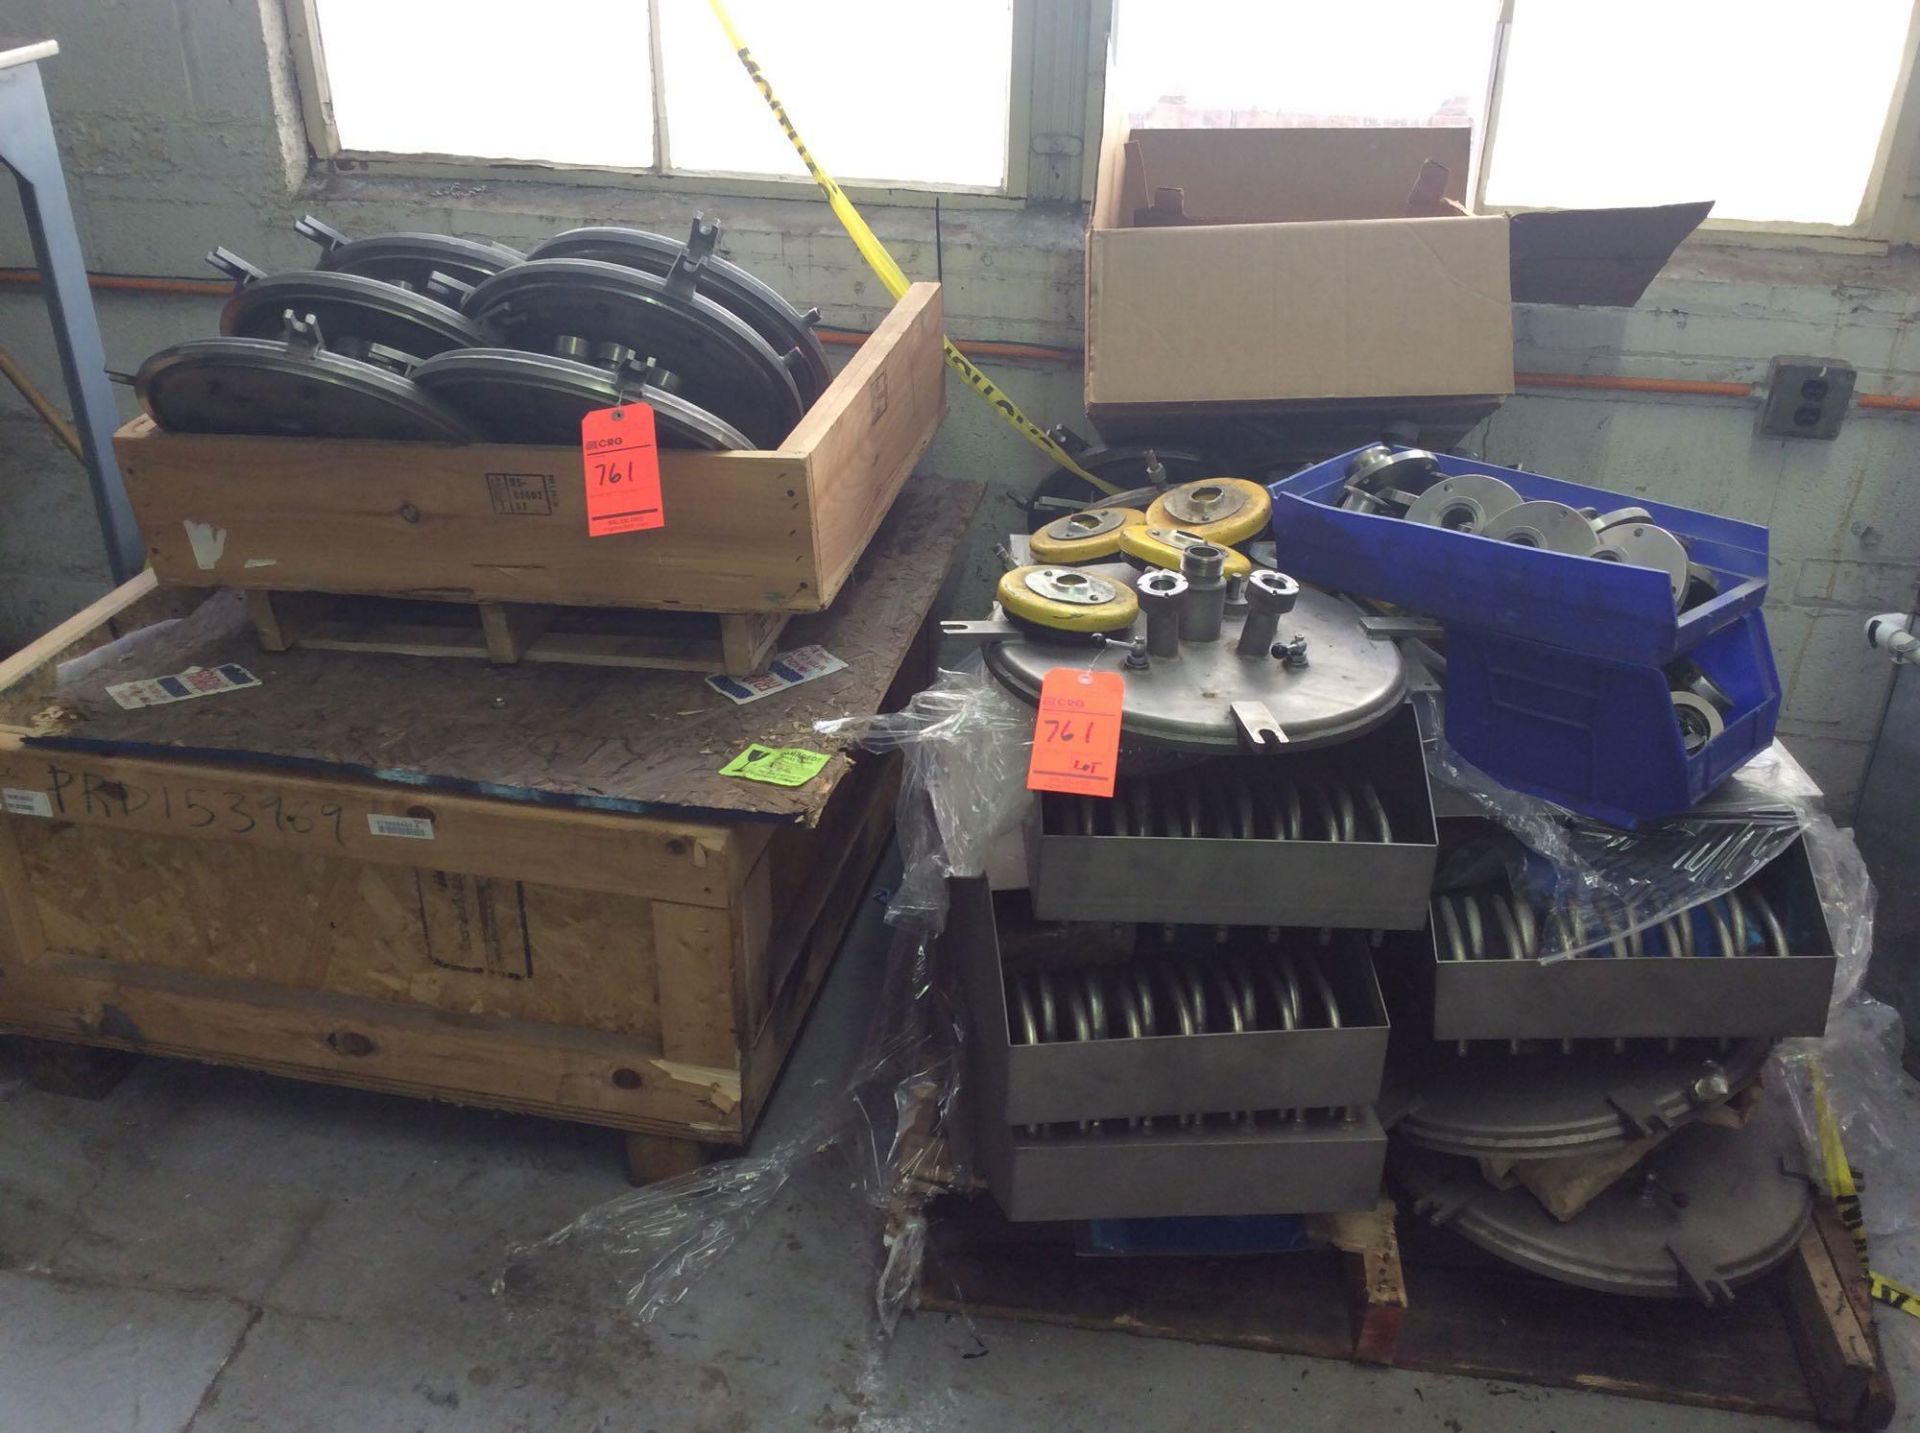 Lot of asst furnace parts, including filters, foot pads, Airserco vacuum gauges, Sola battery backup